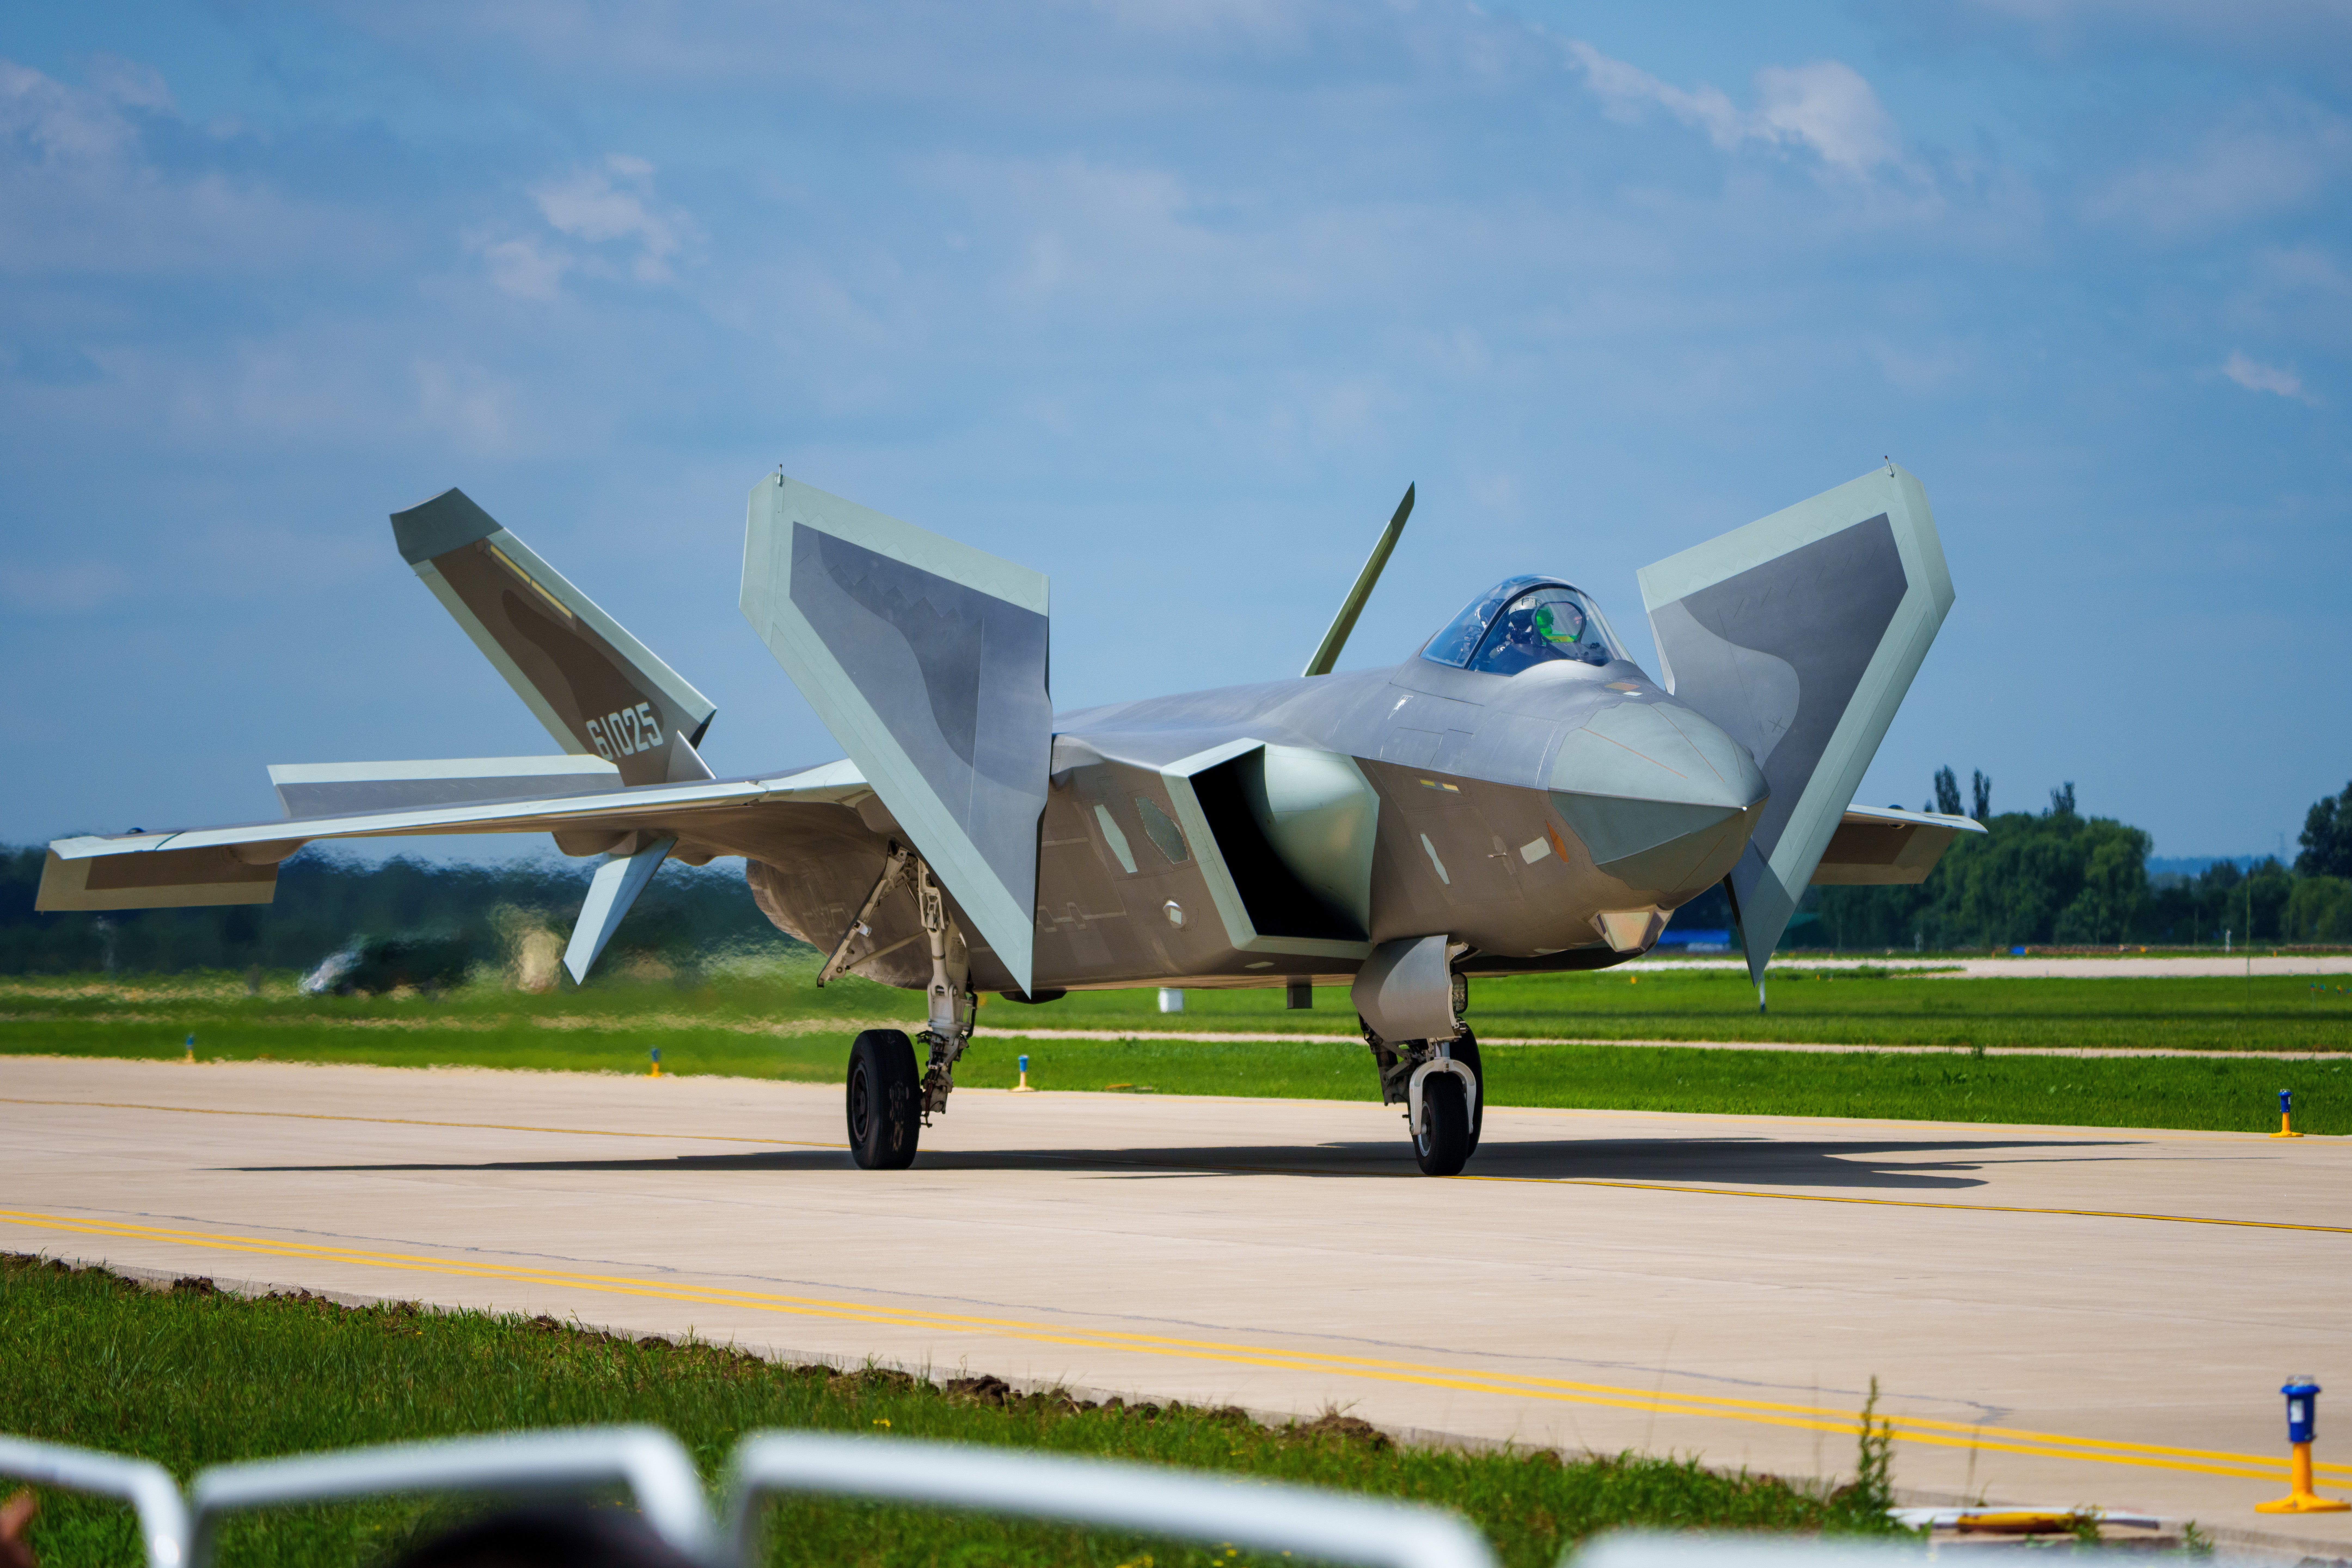 CHANGCHUN, CHINA - JULY 24: A J-20 stealth fighter jet rehearses for the upcoming 2023 Changchun Air Show on July 24, 2023 in Changchun, Jilin Province of China. (Photo by Wang Jingtian/VCG via Getty Images)